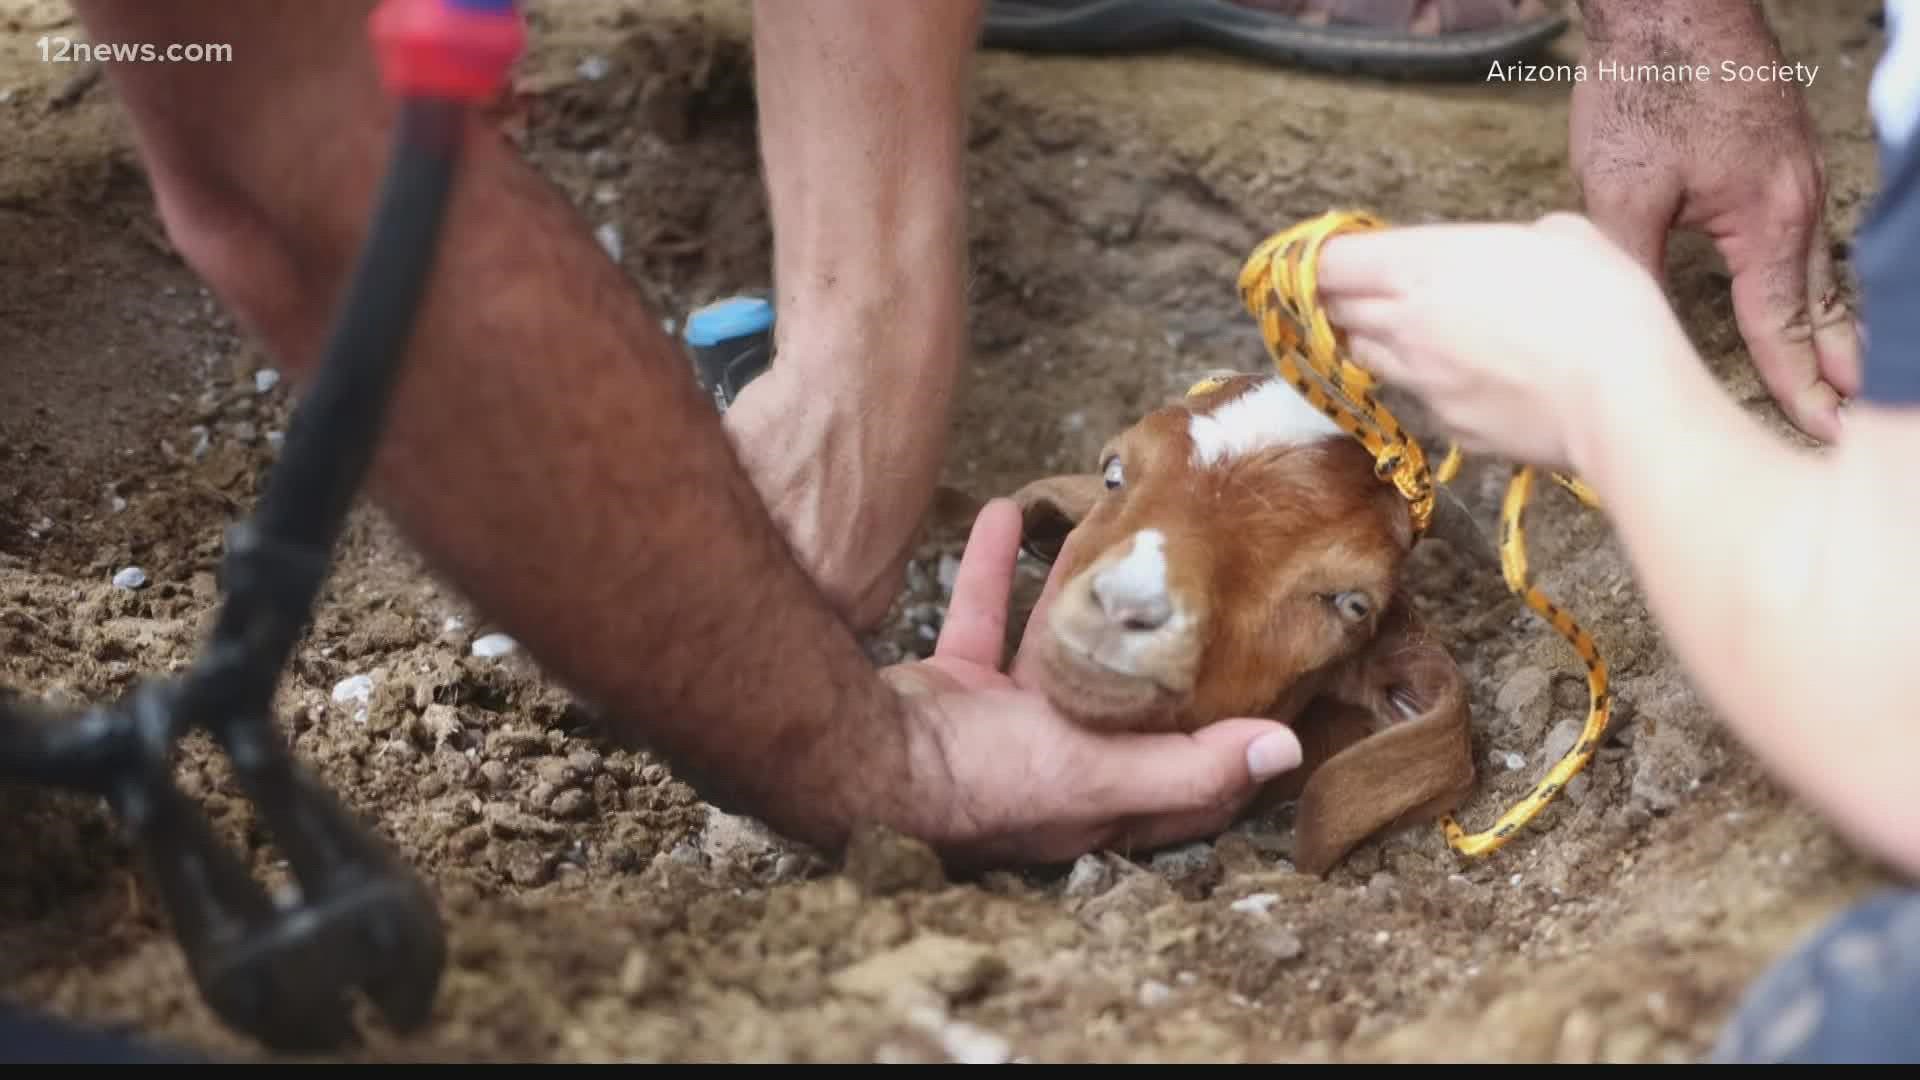 Emergency responders talk about how they rescued a baby goat after it got stuck in an irrigation pipe. Jess Winters has more on the story.